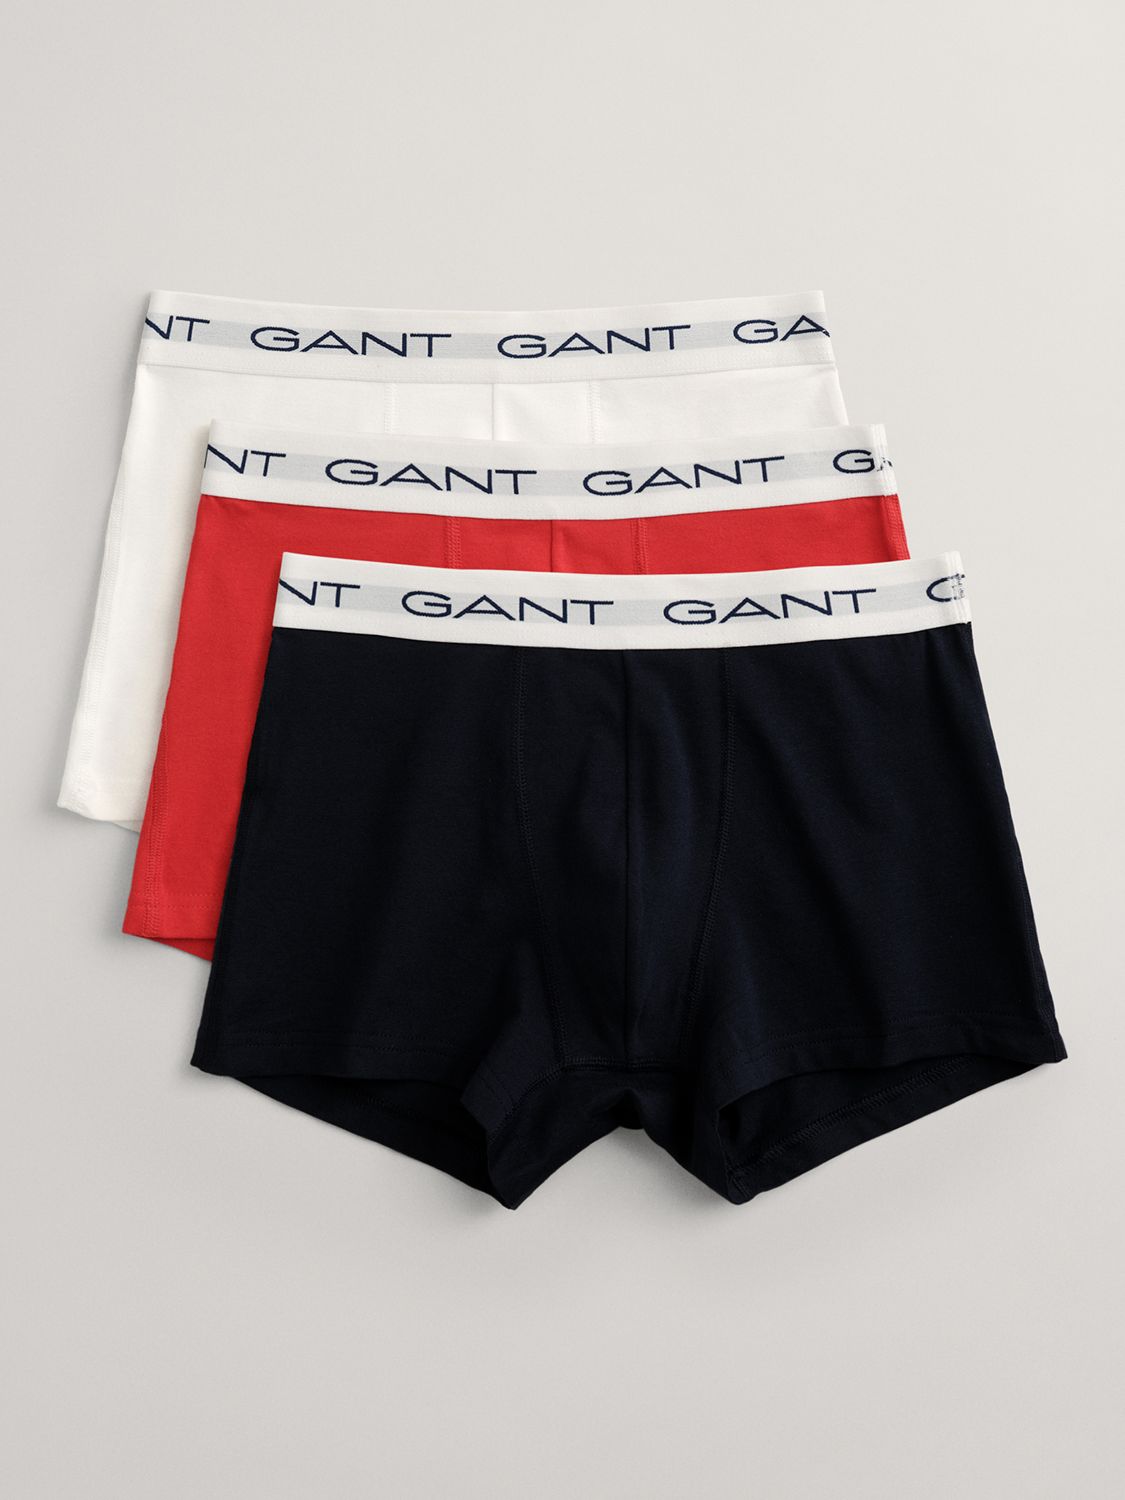 GANT Cotton Stretch Jersey Trunks, Pack of 3, Navy/Red/White, XL